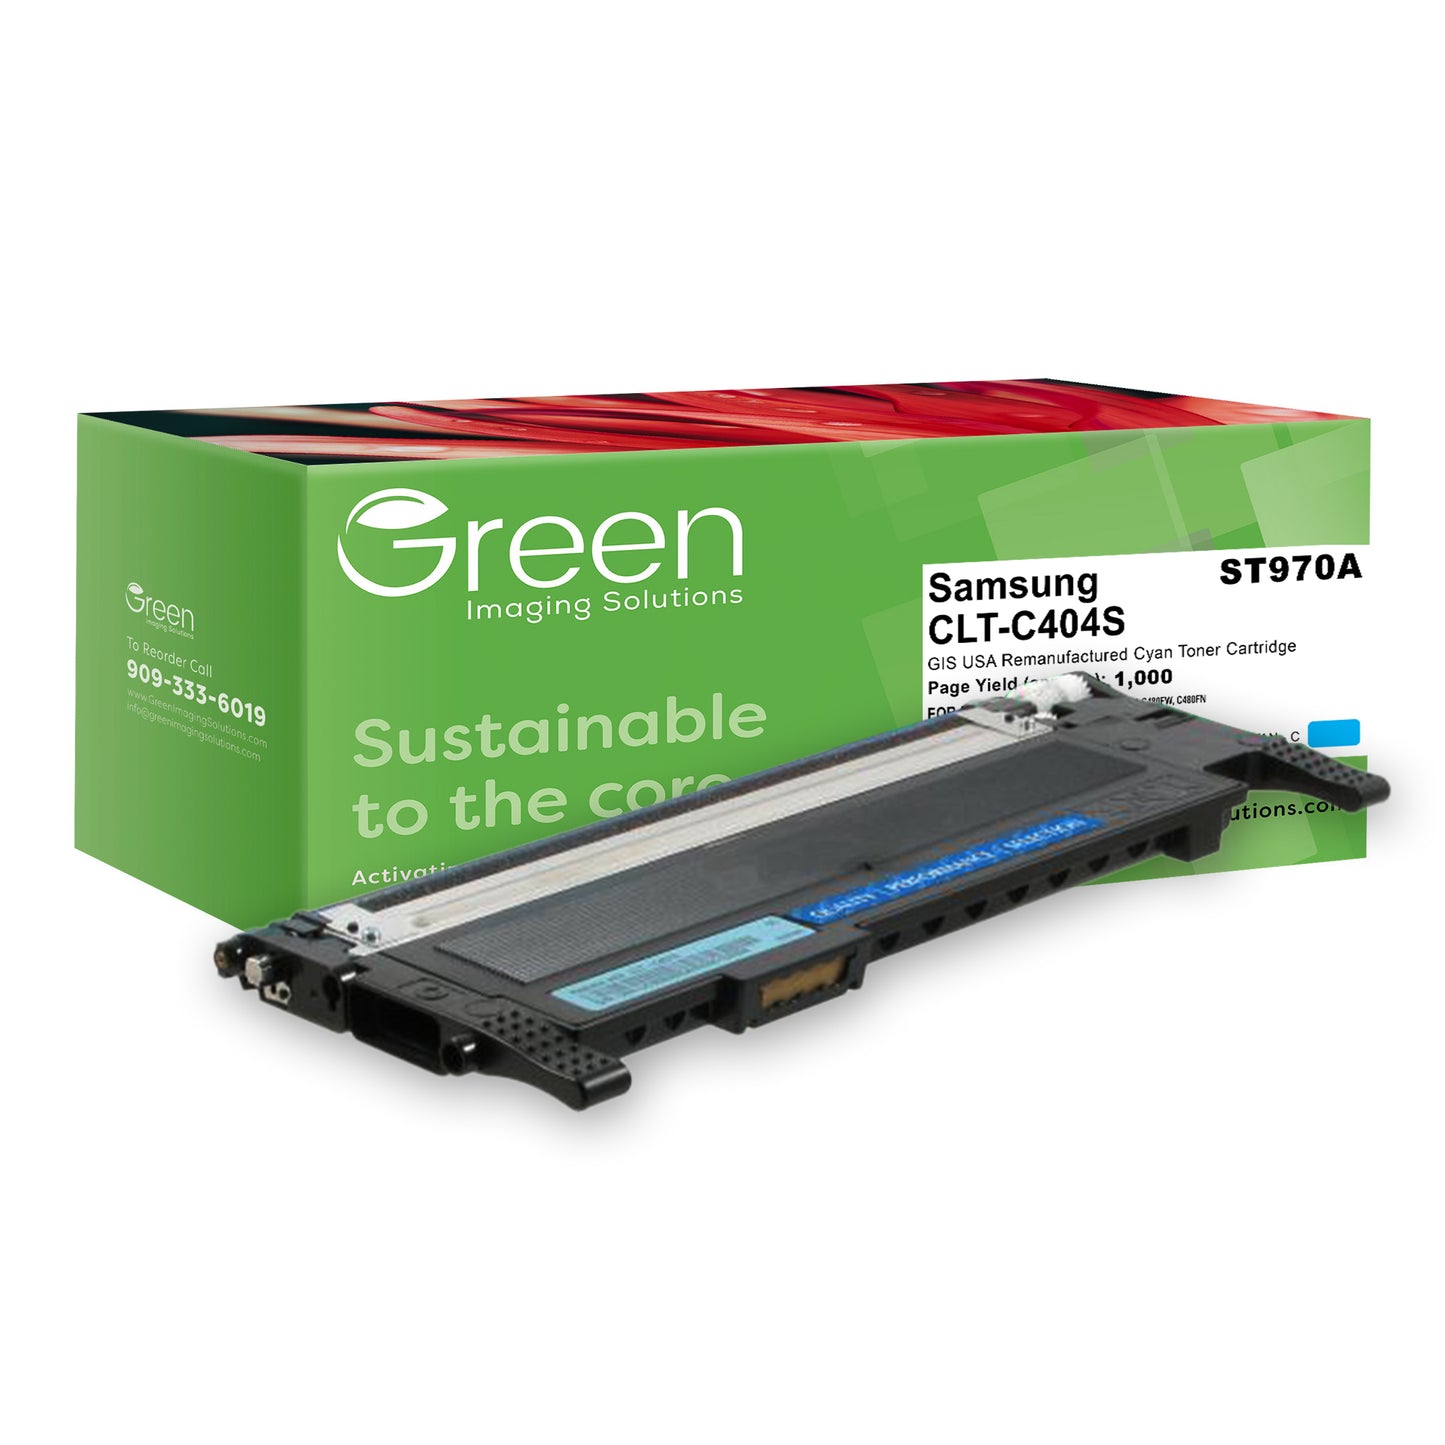 Green Imaging Solutions USA Remanufactured Cyan Toner Cartridge for Samsung CLT-C404S